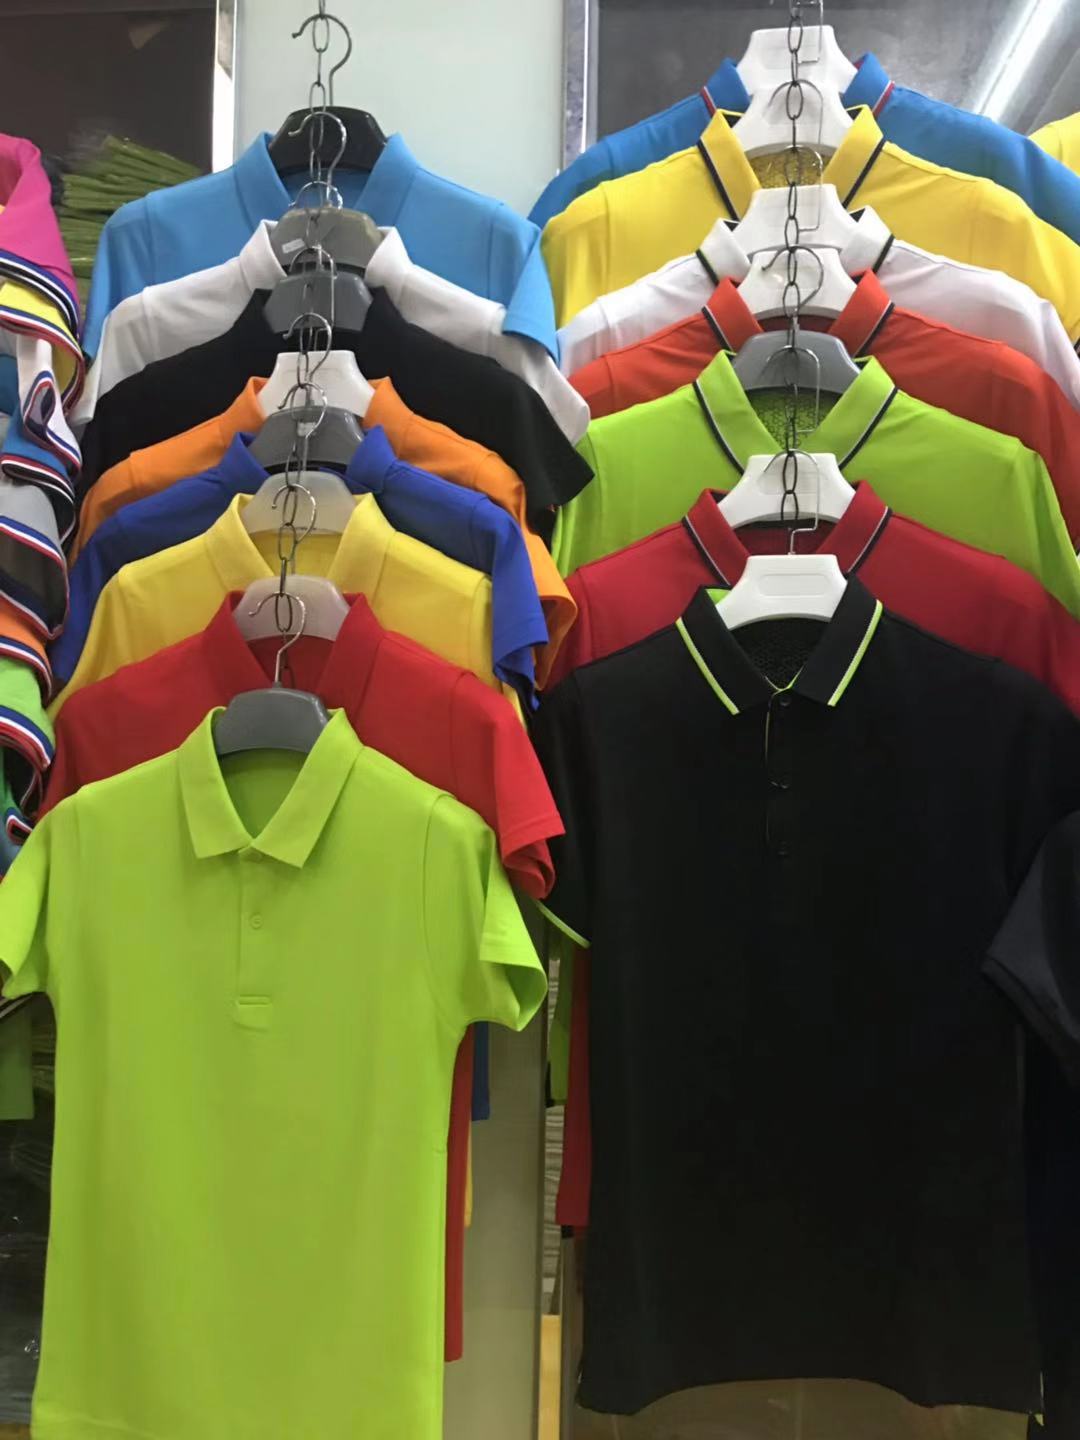 Polo 03-Promotional Polo Shirts from China T-shirts Manufacturer